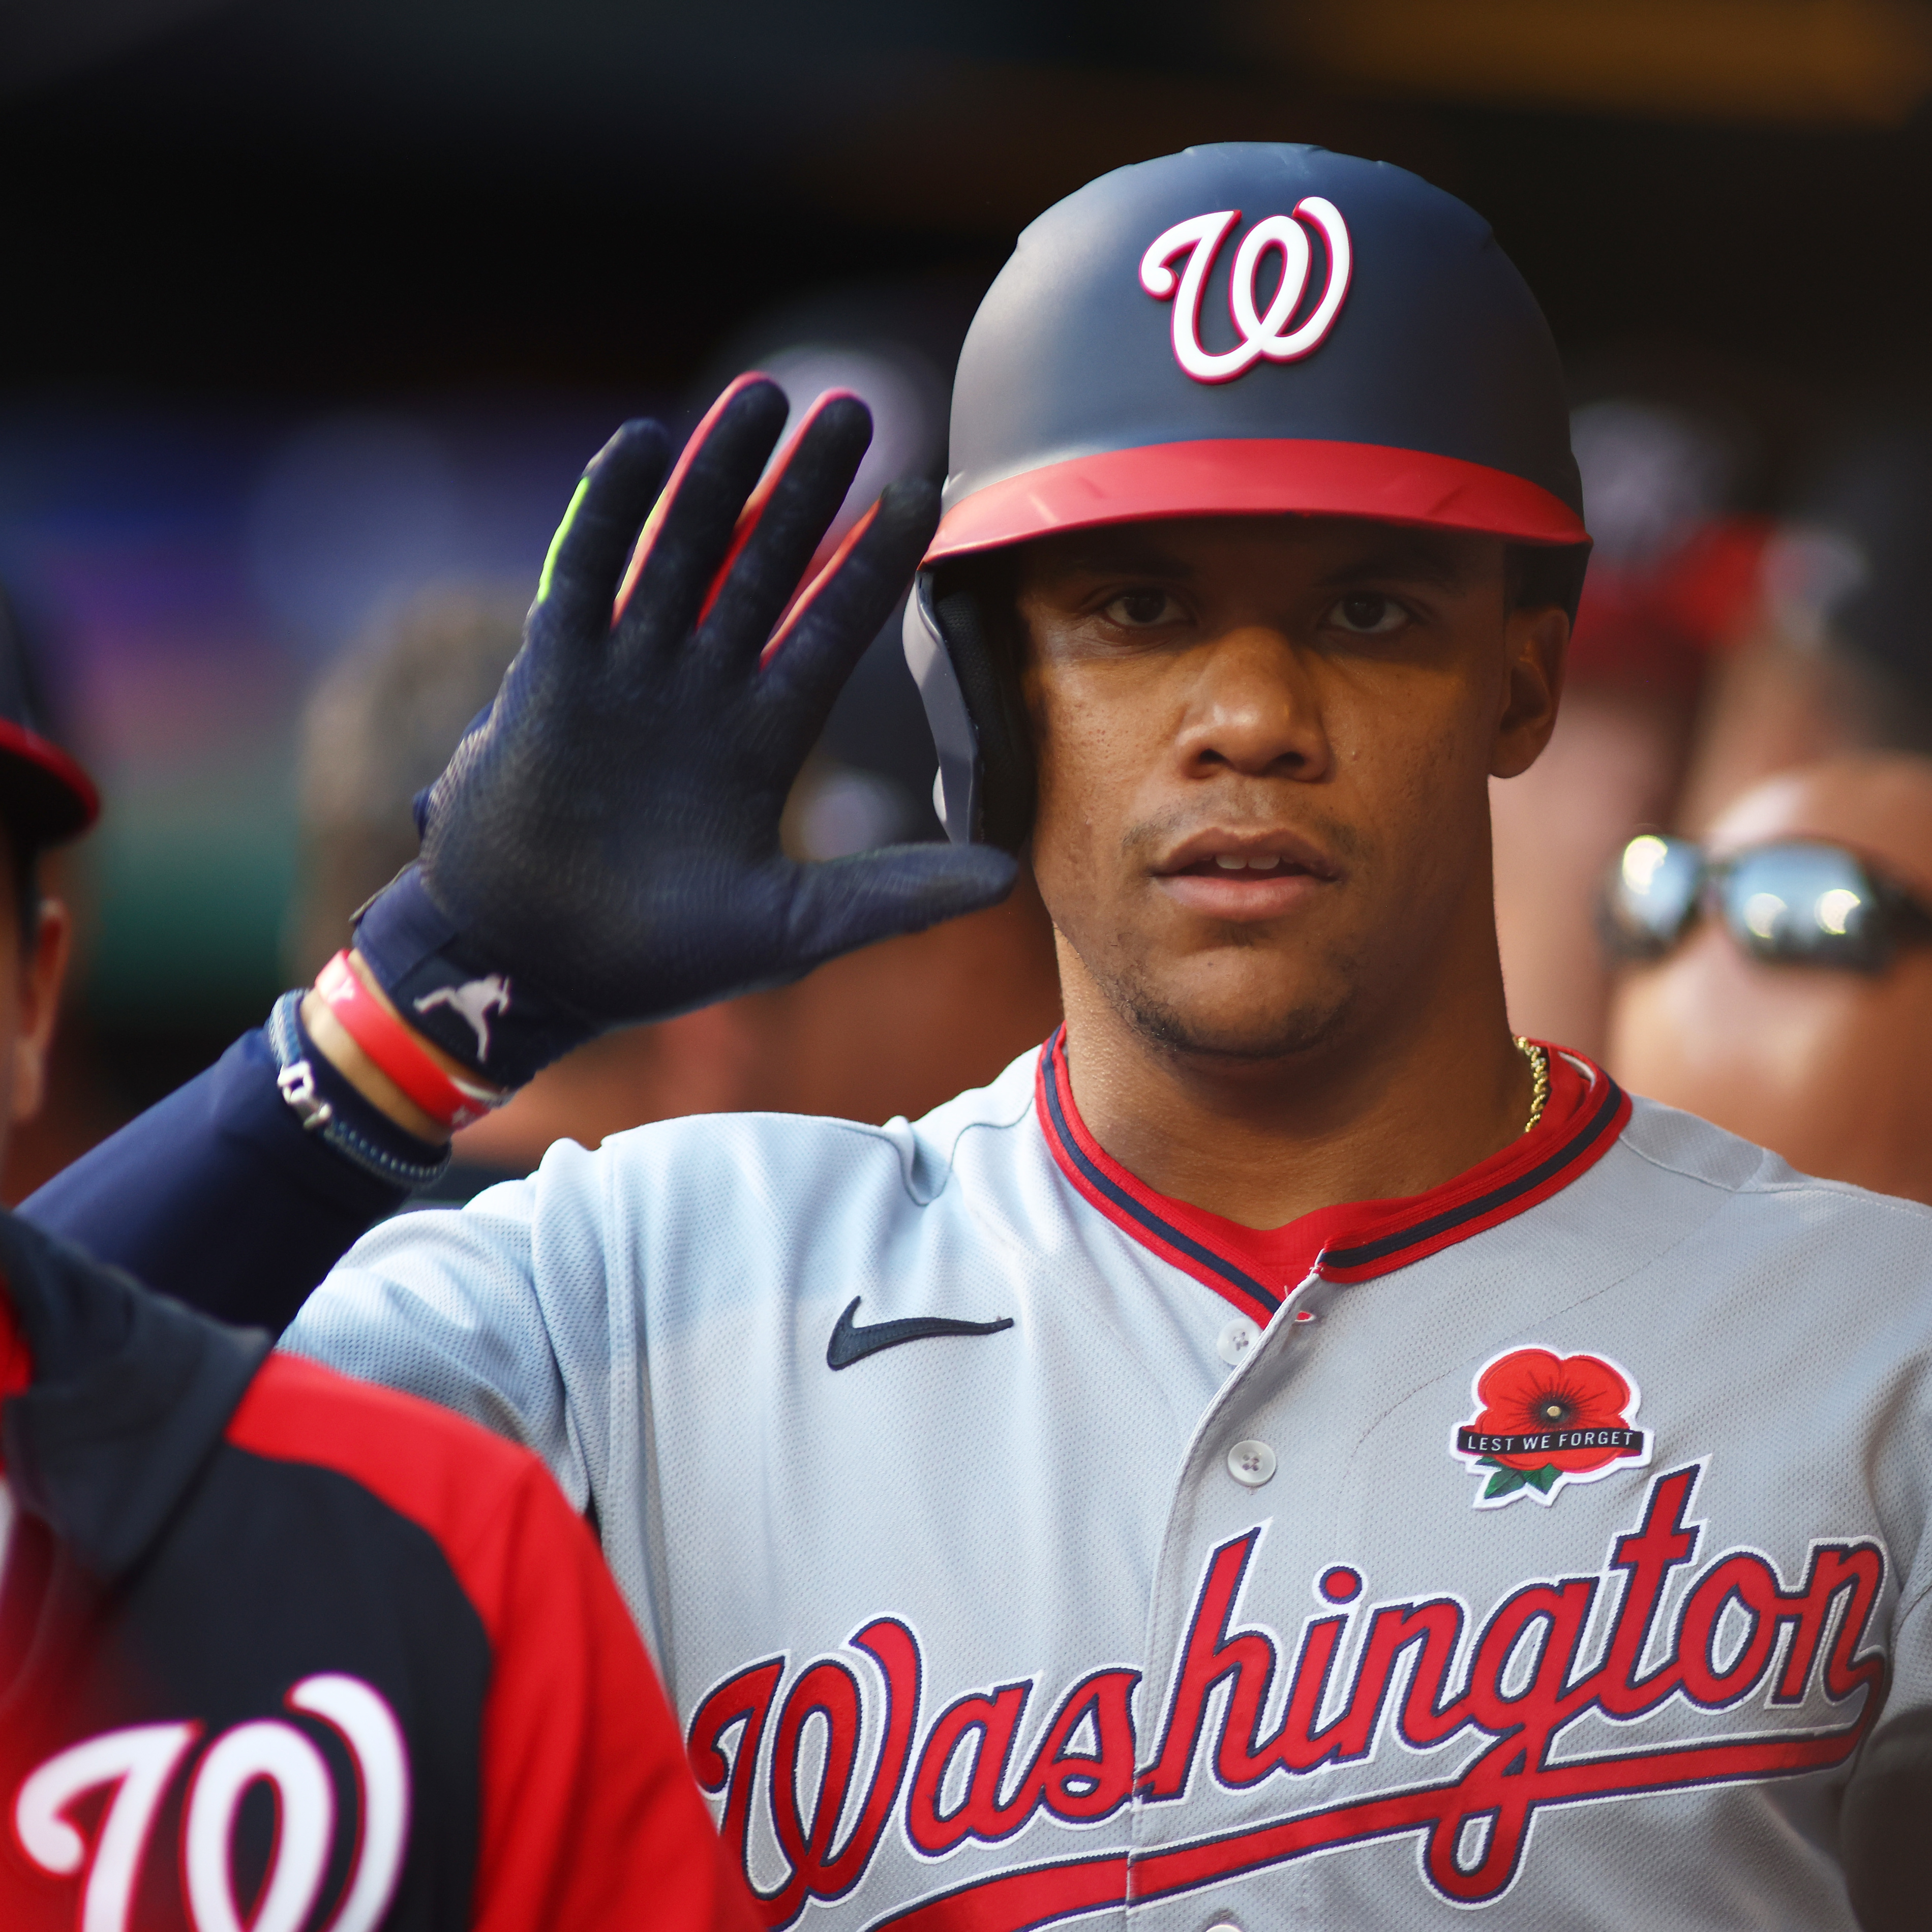 Juan Soto 'Has to Be Miserable' With Nationals, Opposing MLB Coach Says